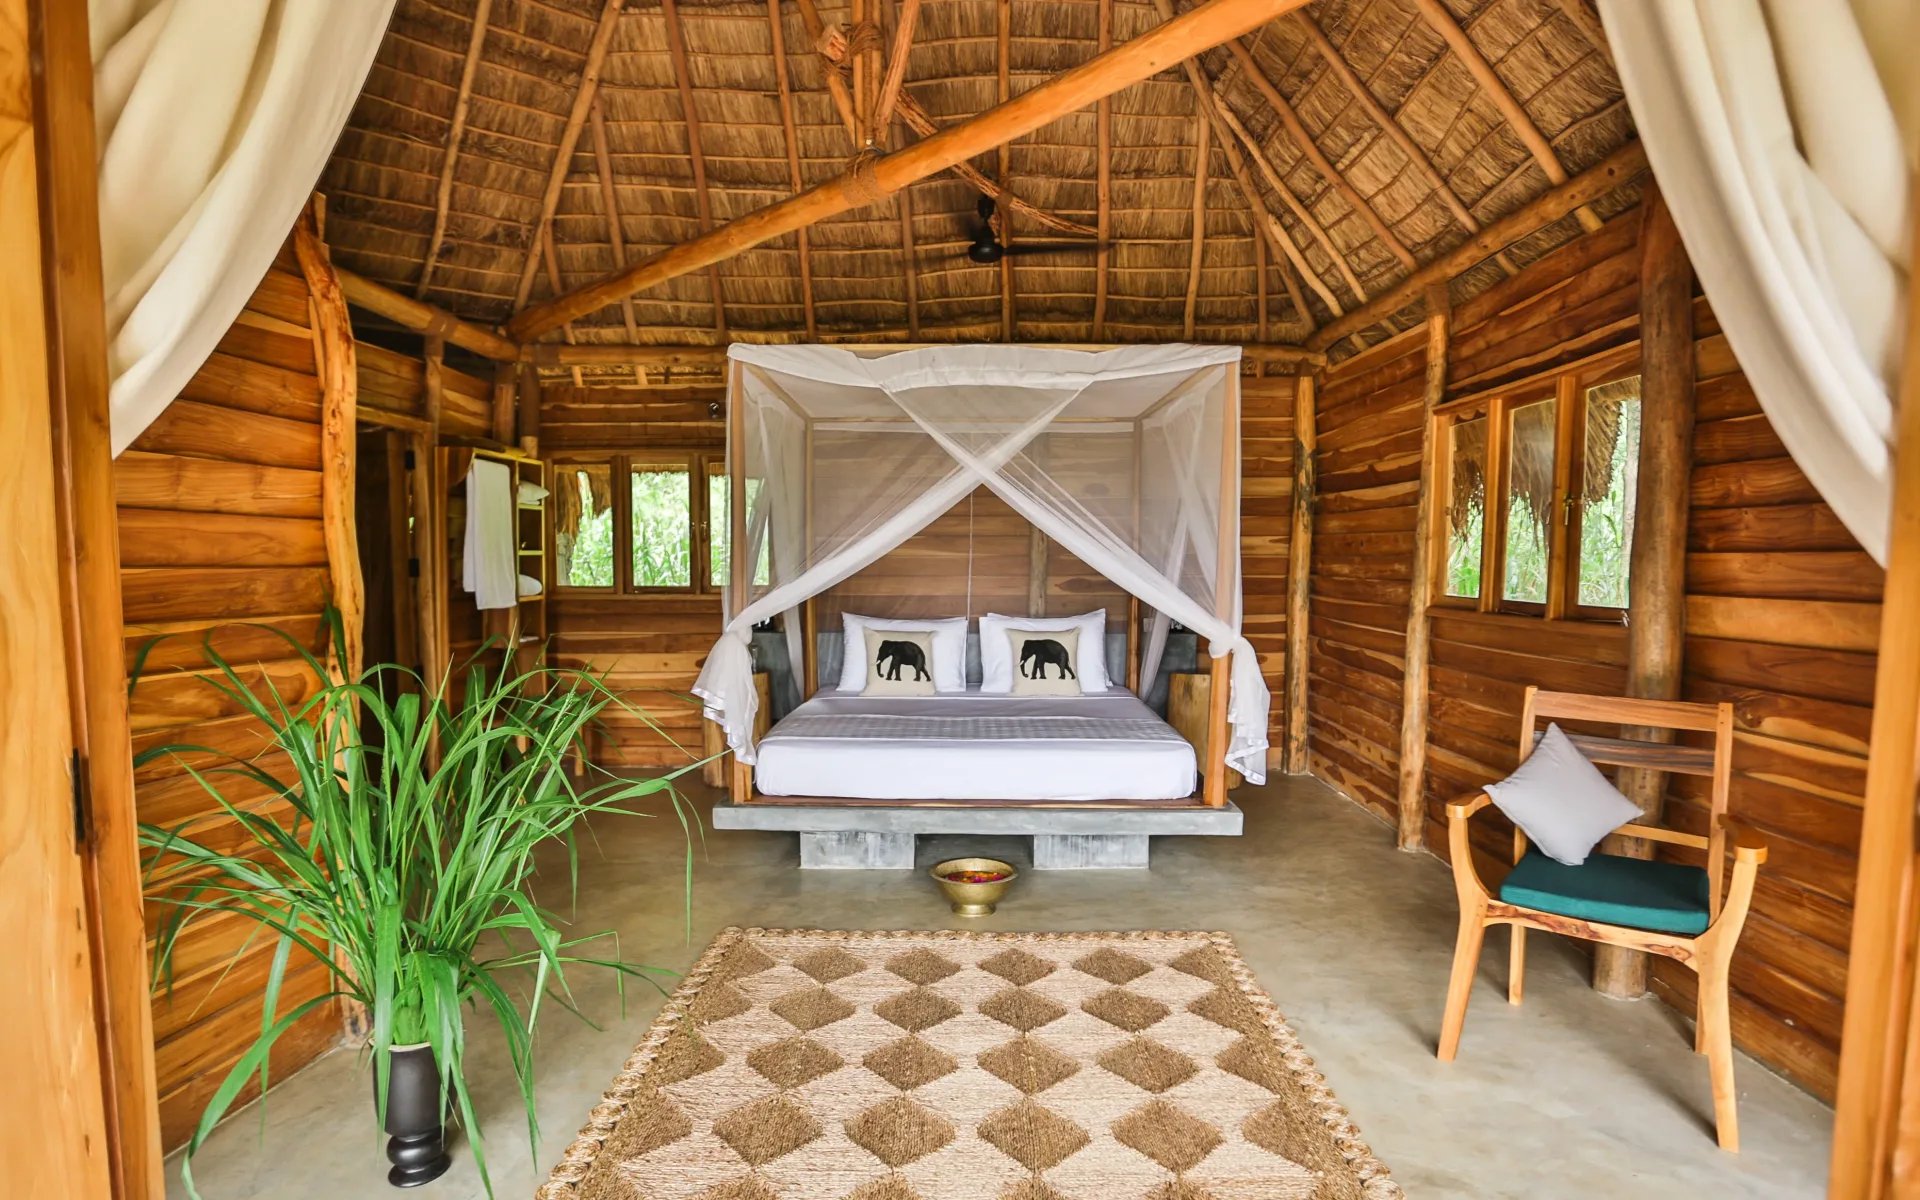 Gal Oya Lodge bedroom with canopy bed.